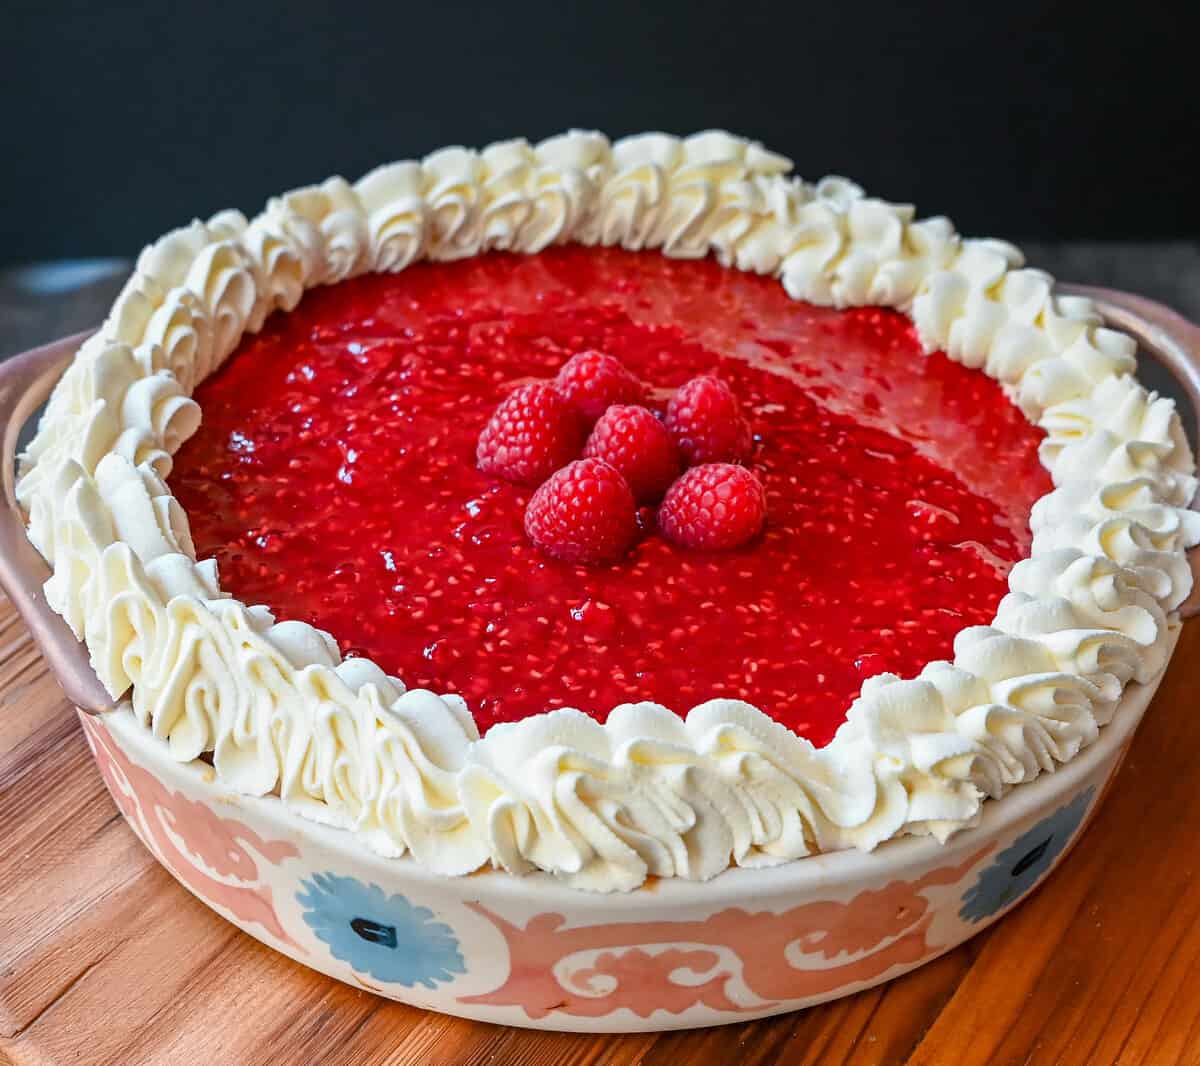 This Homemade Raspberry Cream Pie is made with a sweet luscious cream cheese filling and topped with a homemade raspberry sauce all in a homemade crust. This No-Bake Raspberry Cream Cheese Pie will become one of your absolute favorites!